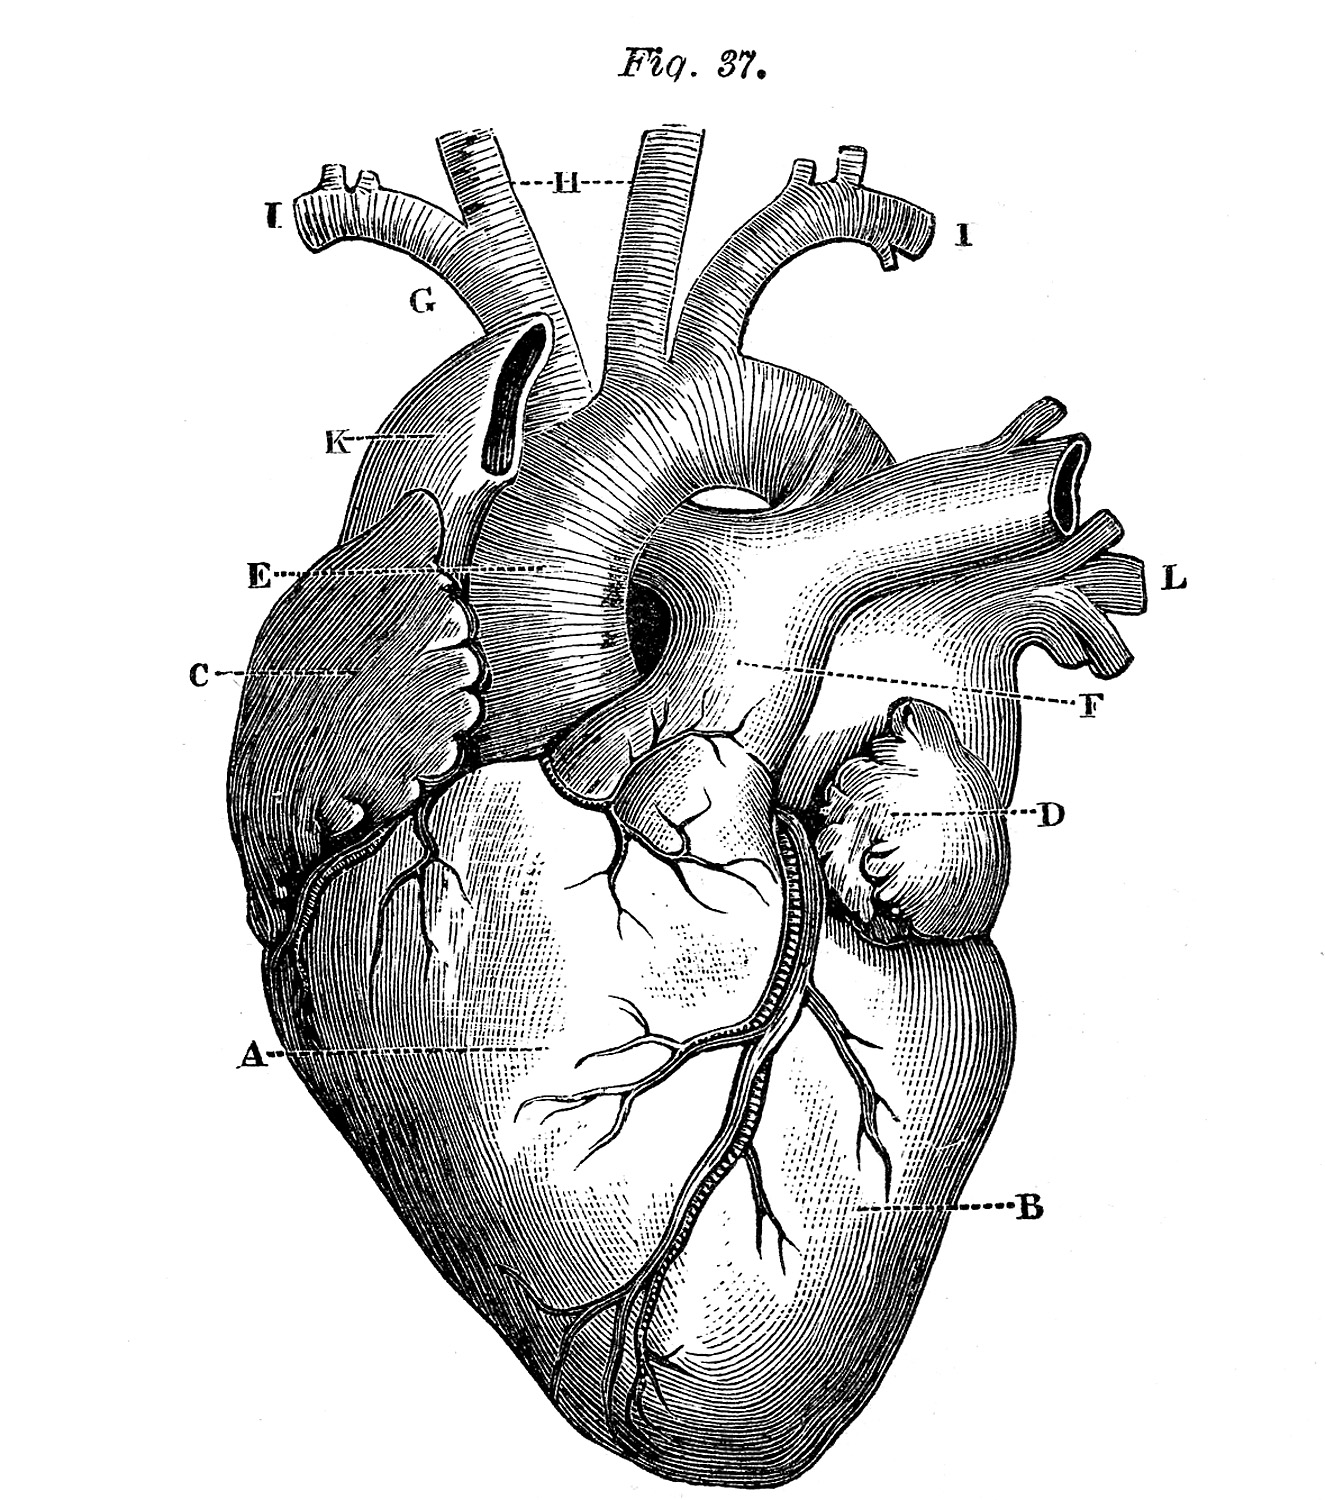 Royalty Free Images - Anatomical Heart - Vintage - The ...